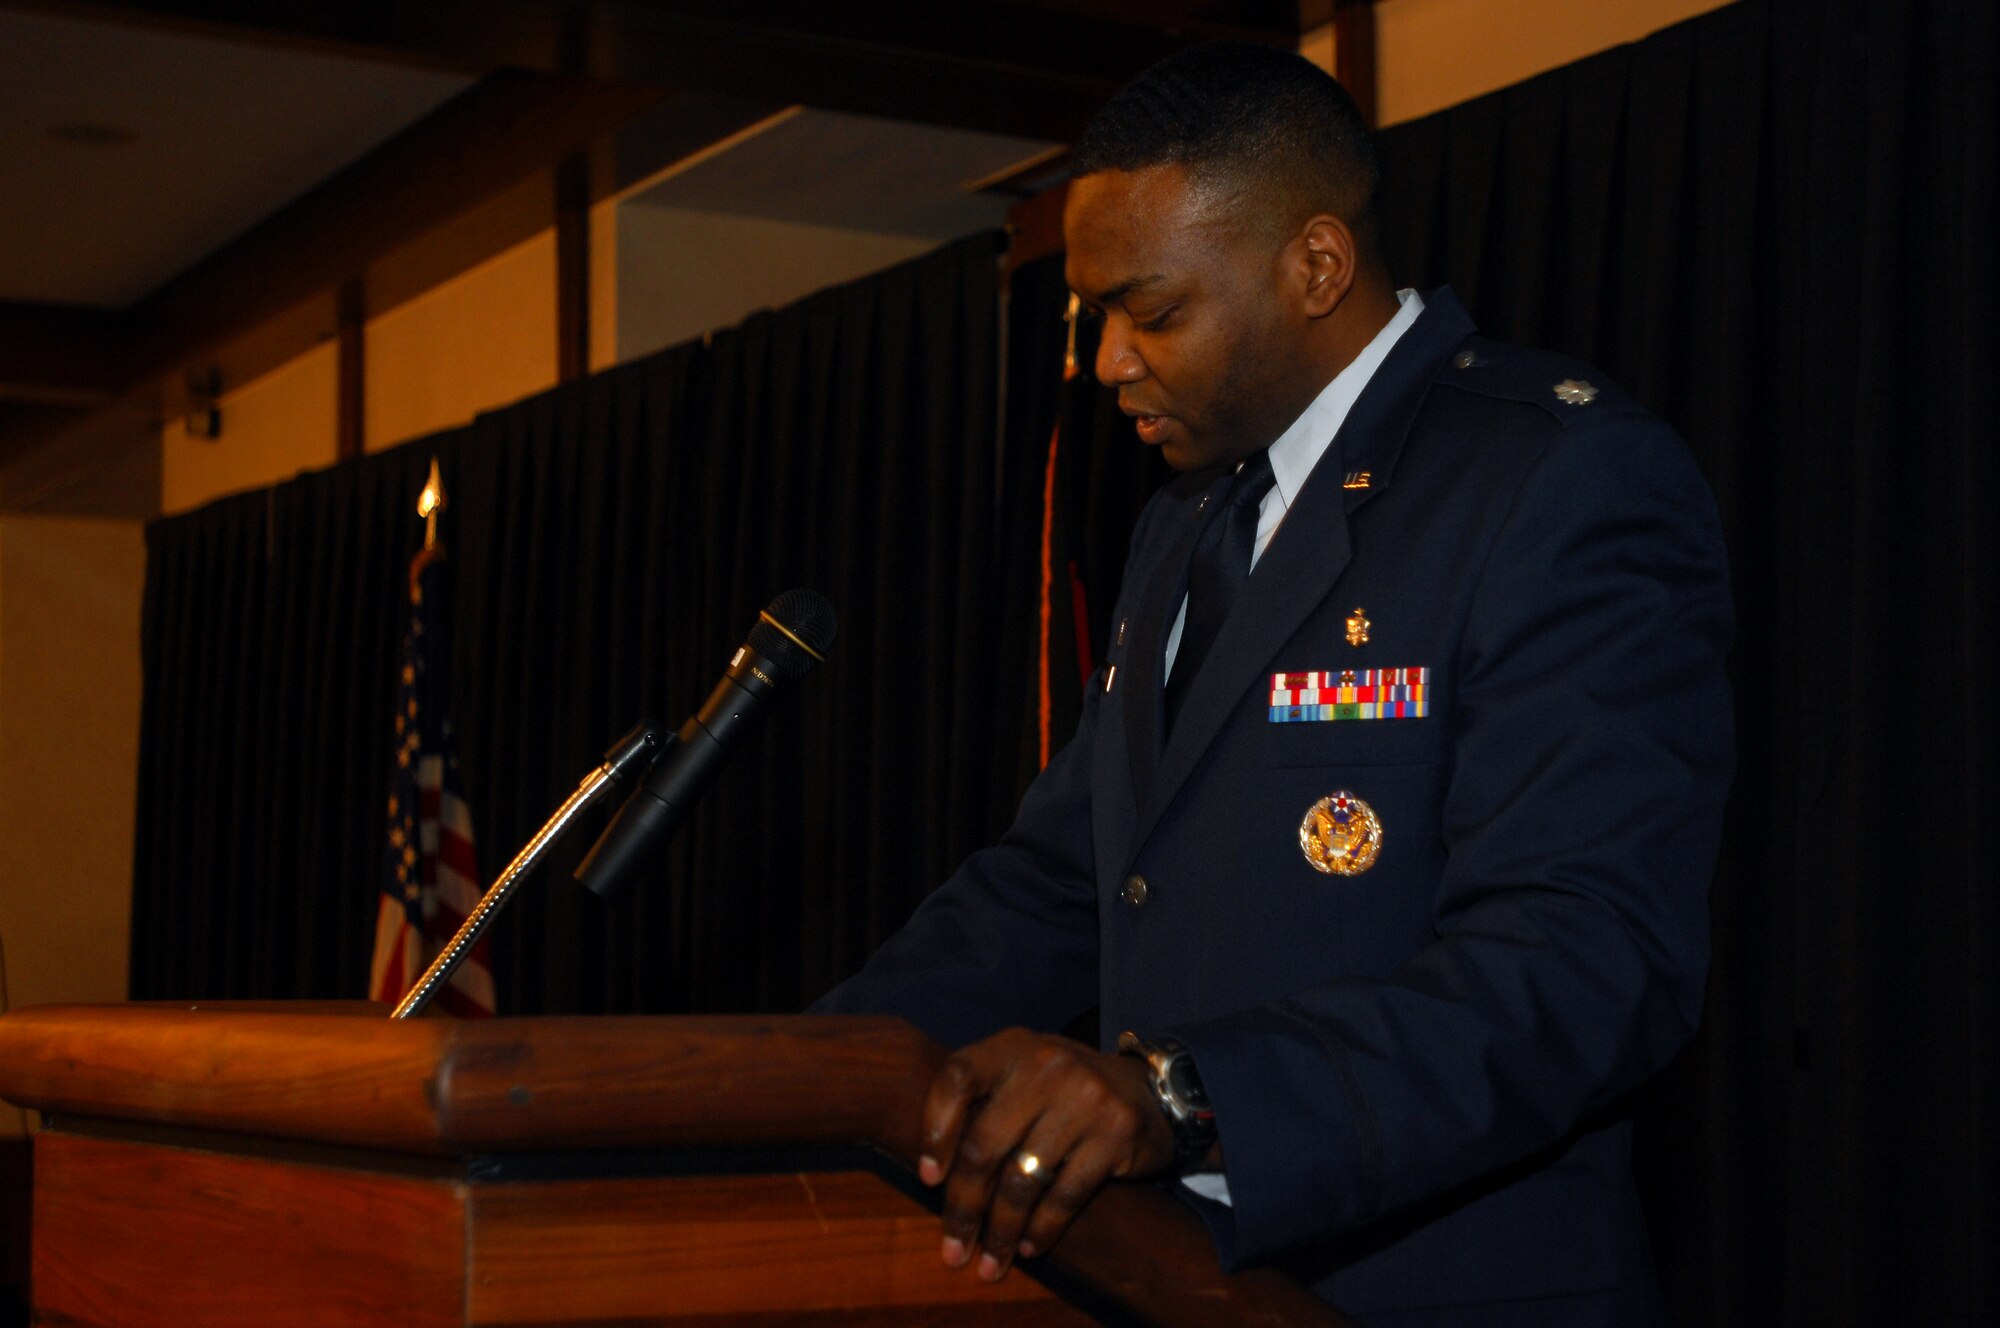 Lt Col. Alfred Flowers, 435th Medical Support Squadron commander, gives an inspirational speech at the African American History Month luncheon Jan. 30, 2009, at Ramstein Air Base. The month dedicated to African American heritage kicked-off with the luncheon and will be celebrated throughout the month of February. (U.S. Air Force photo by Airman 1st Class Kenny Holston) 